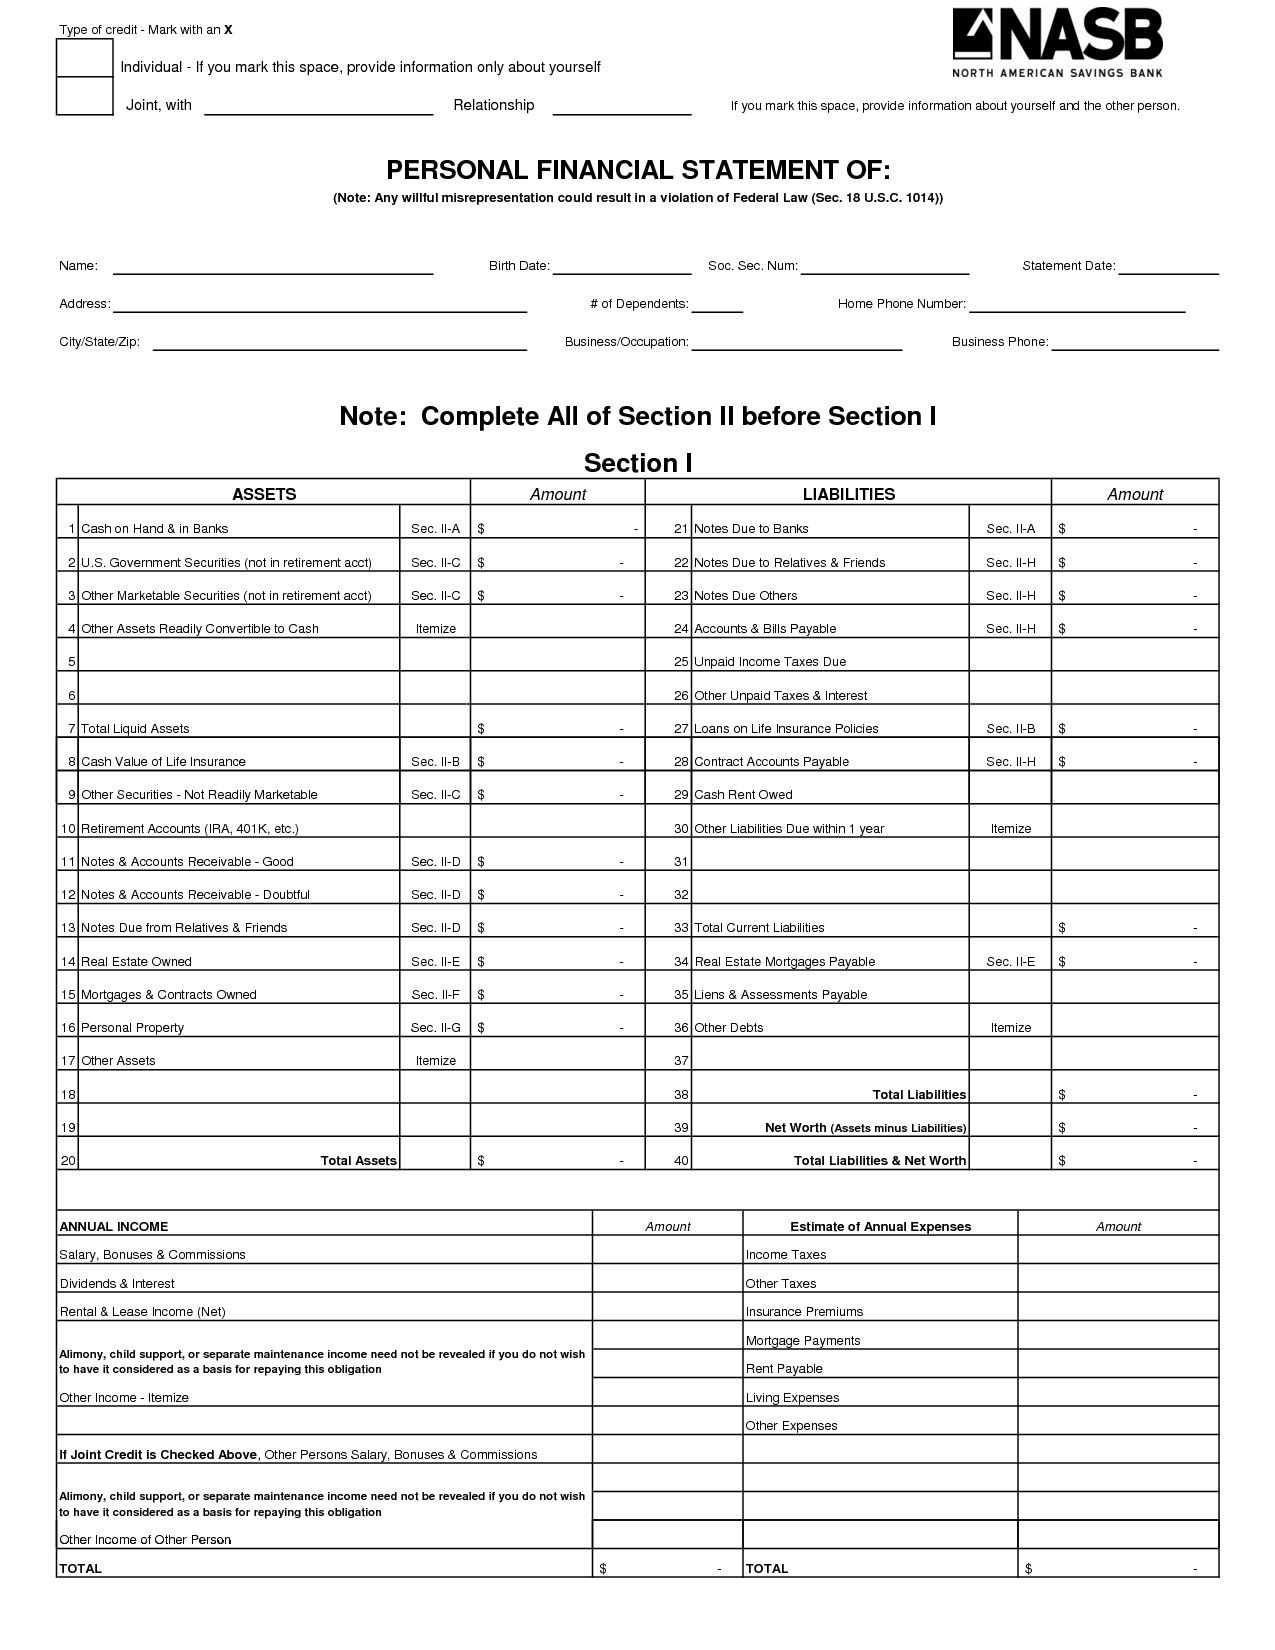 Personal Financial Statement Template Free Elegant Free Printable Personal Financial Statem Personal Financial Statement Statement Template Financial Statement